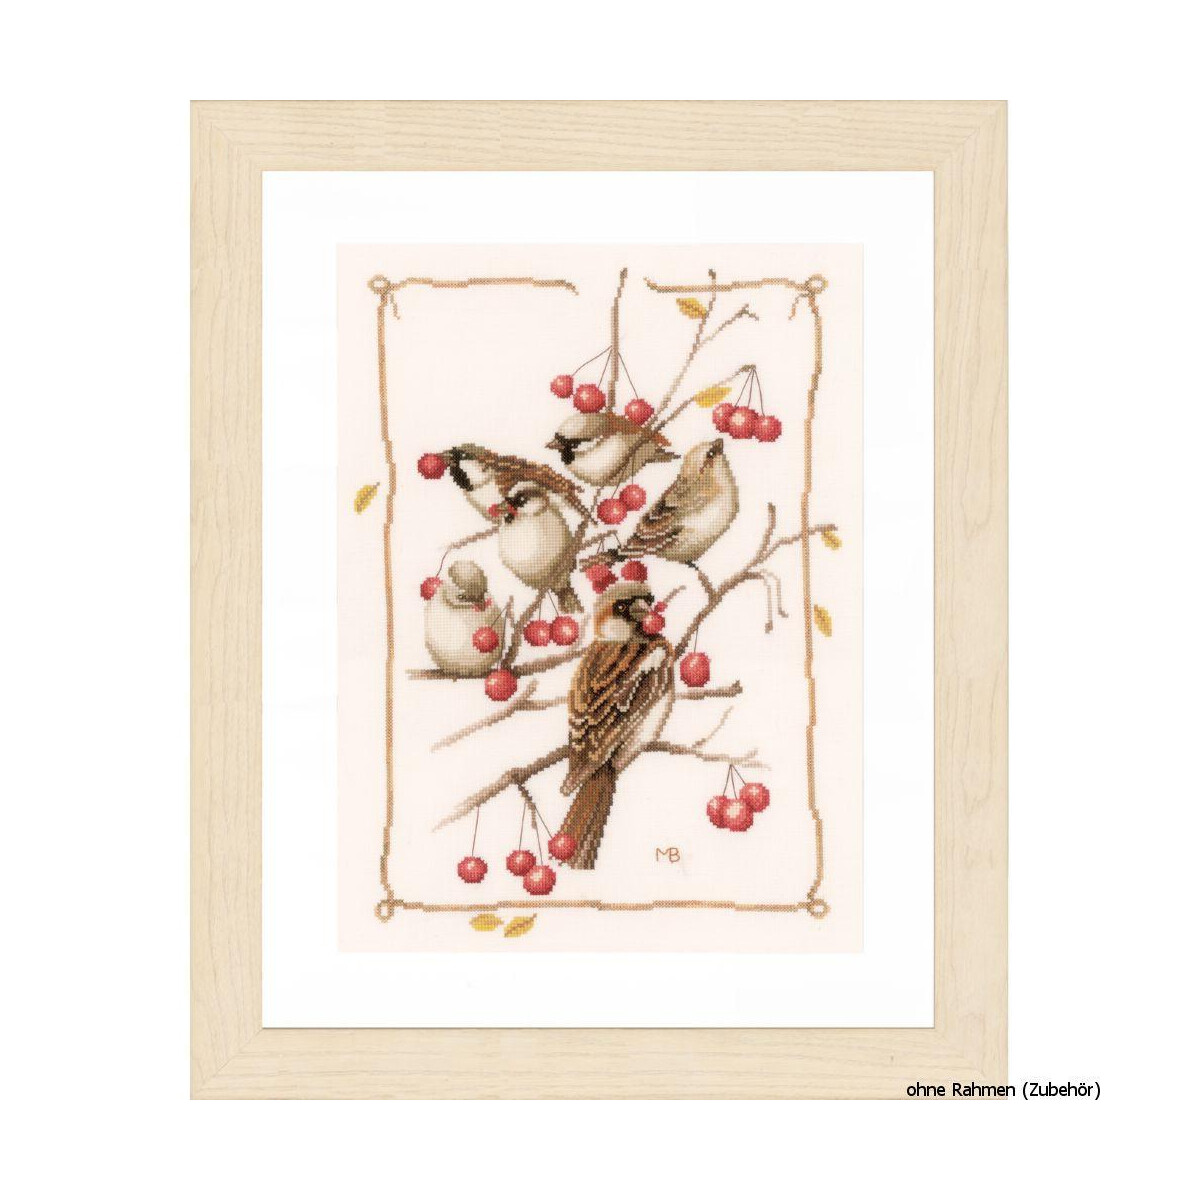 A framed work of art shows five birds sitting on branches...